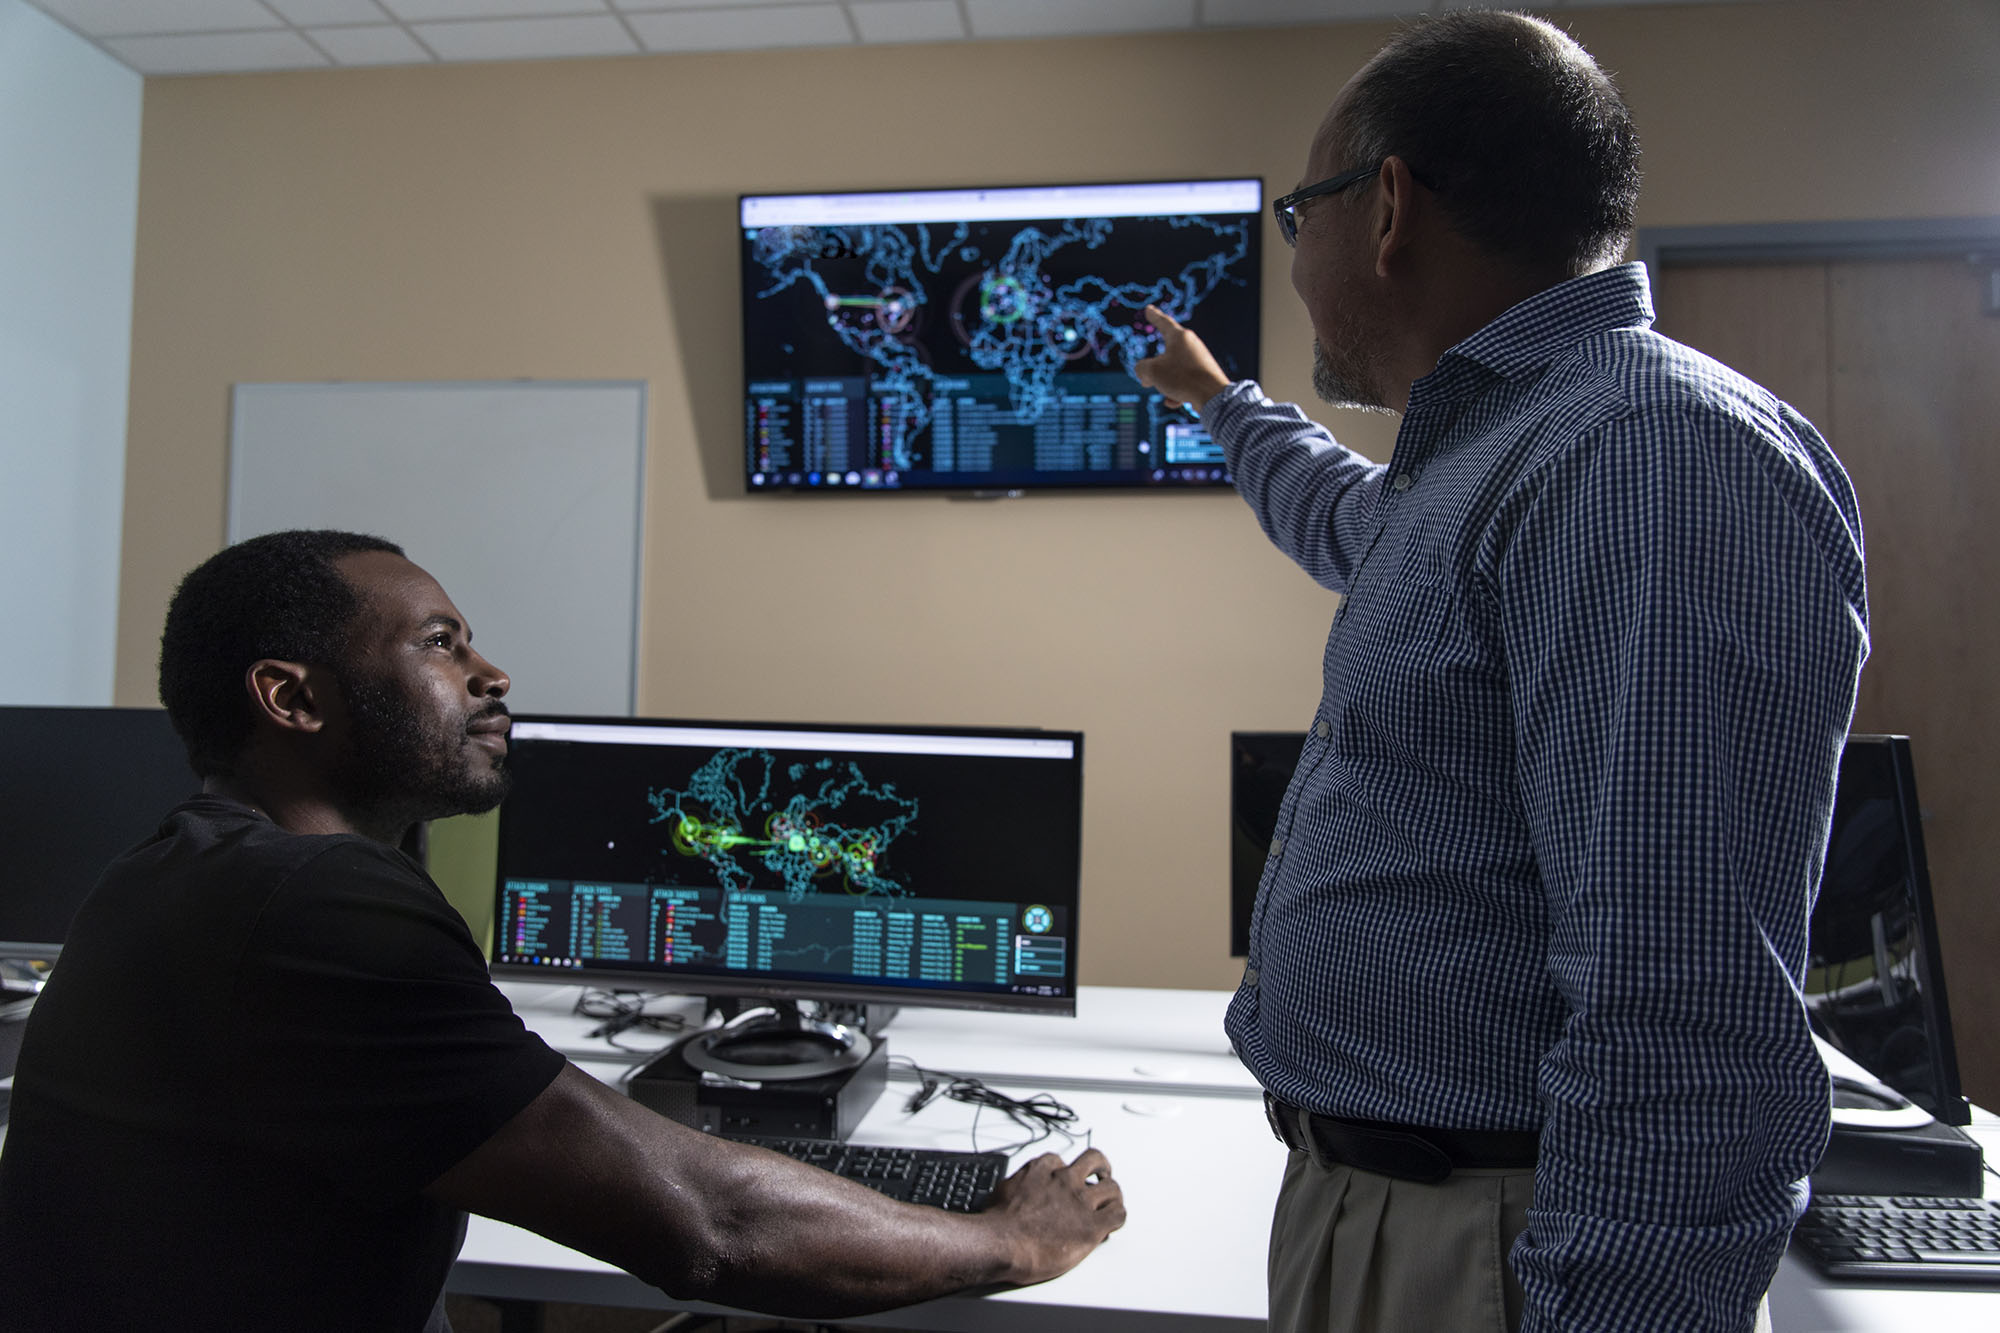 Dr. Guillermo Francia III, faculty scholar of the UWF Center for Cybersecurity, instructing a UWF student in the Cybersecurity Battle Lab in the Science and Engineering Building, Building 4.